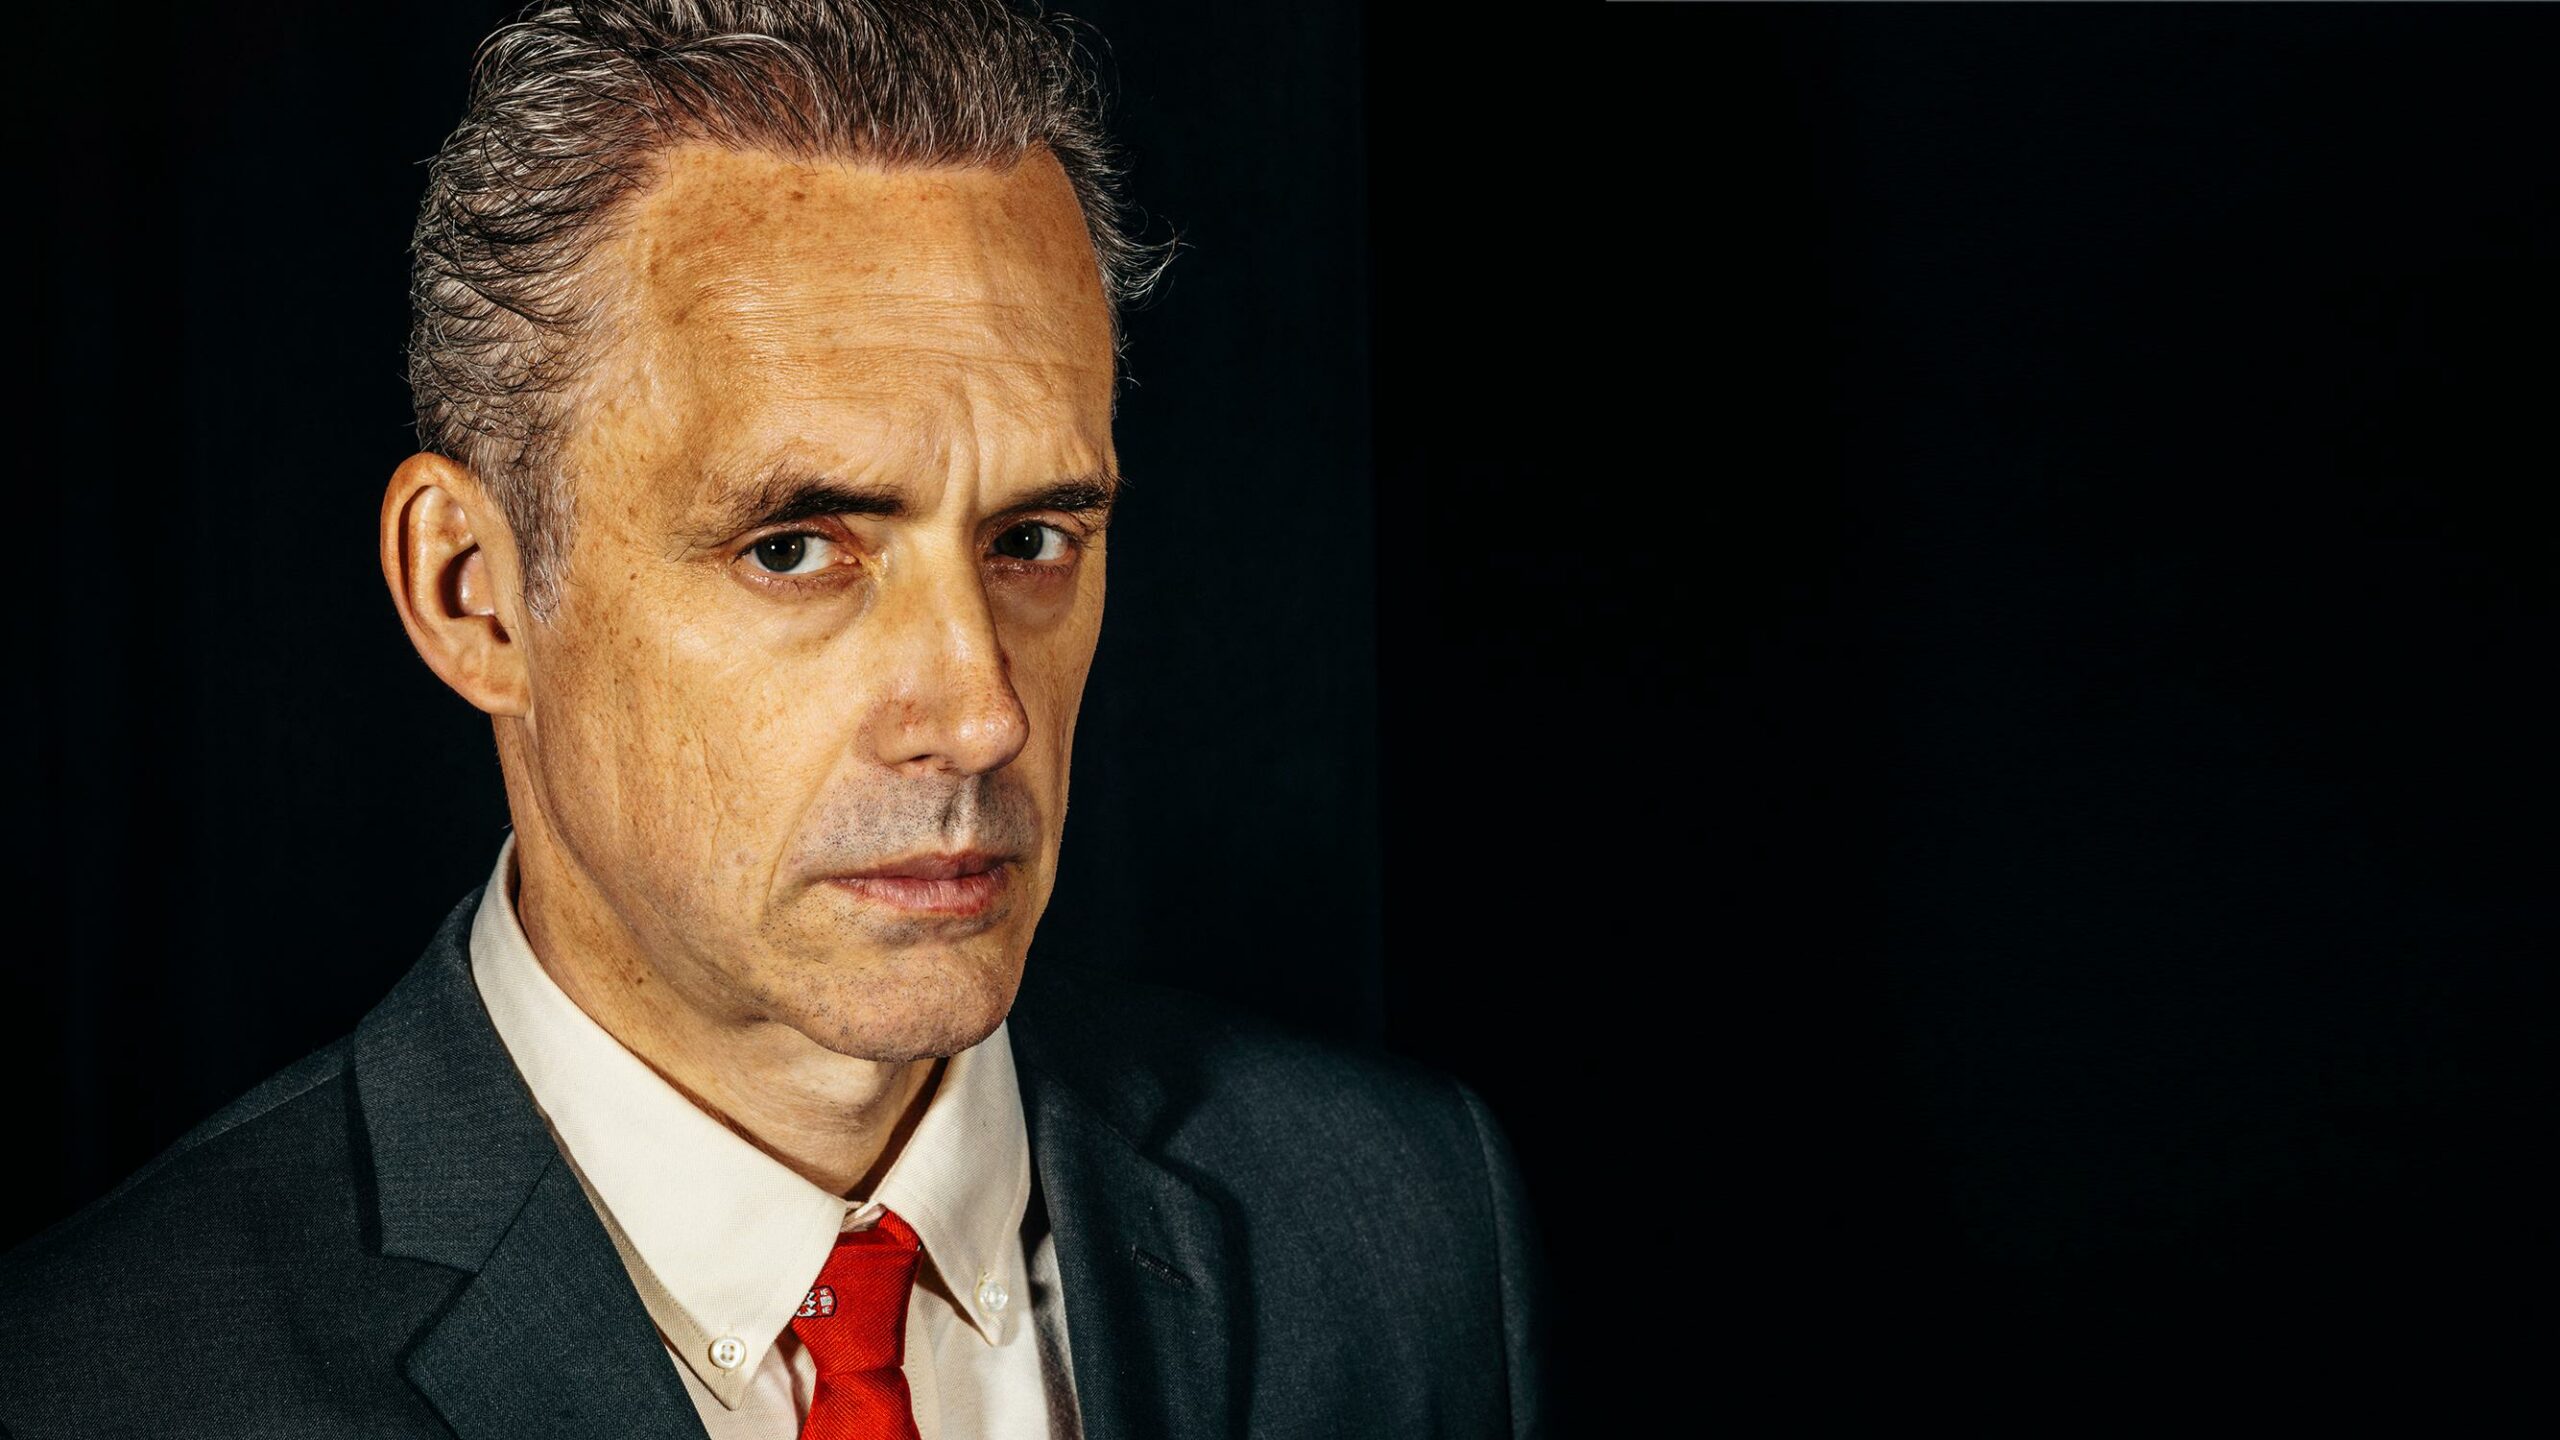 From Academic To Cultural Icon: The Journey Of Jordan Peterson And His Impact On Society